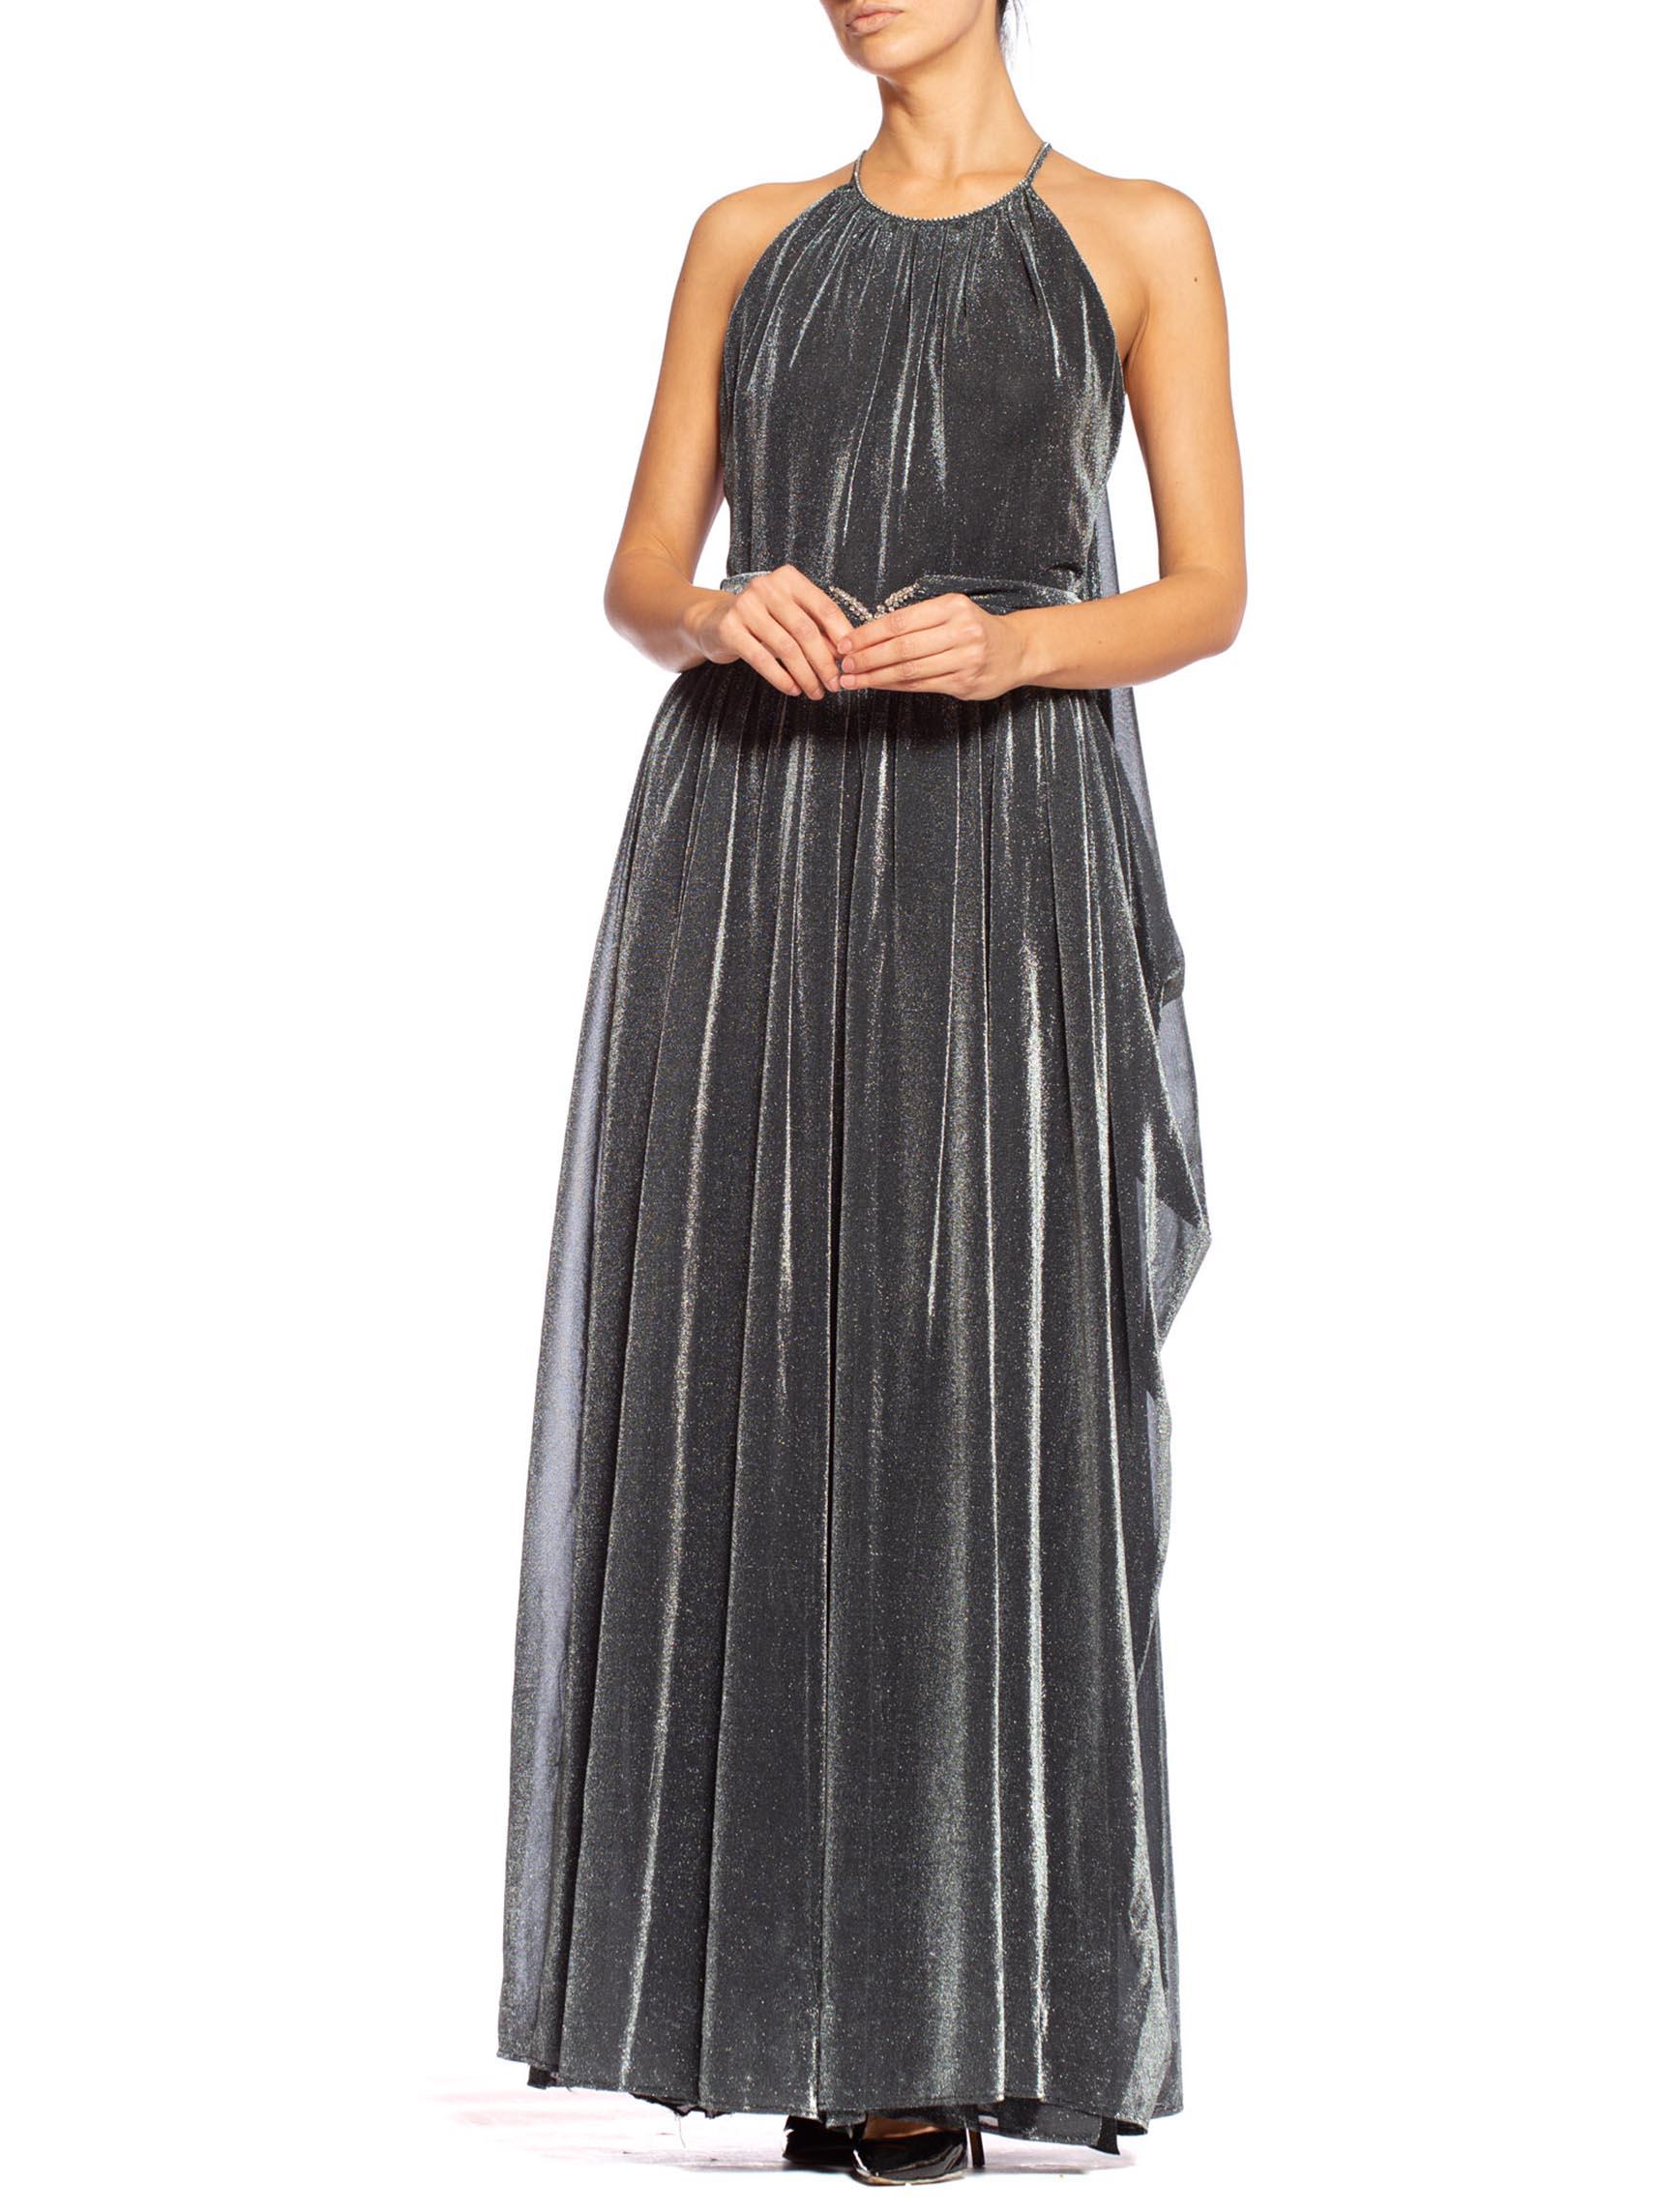 Women's 1970S Silver Metallic Lurex Knit Slinky Disco Gown With Attached Cape & Crystal